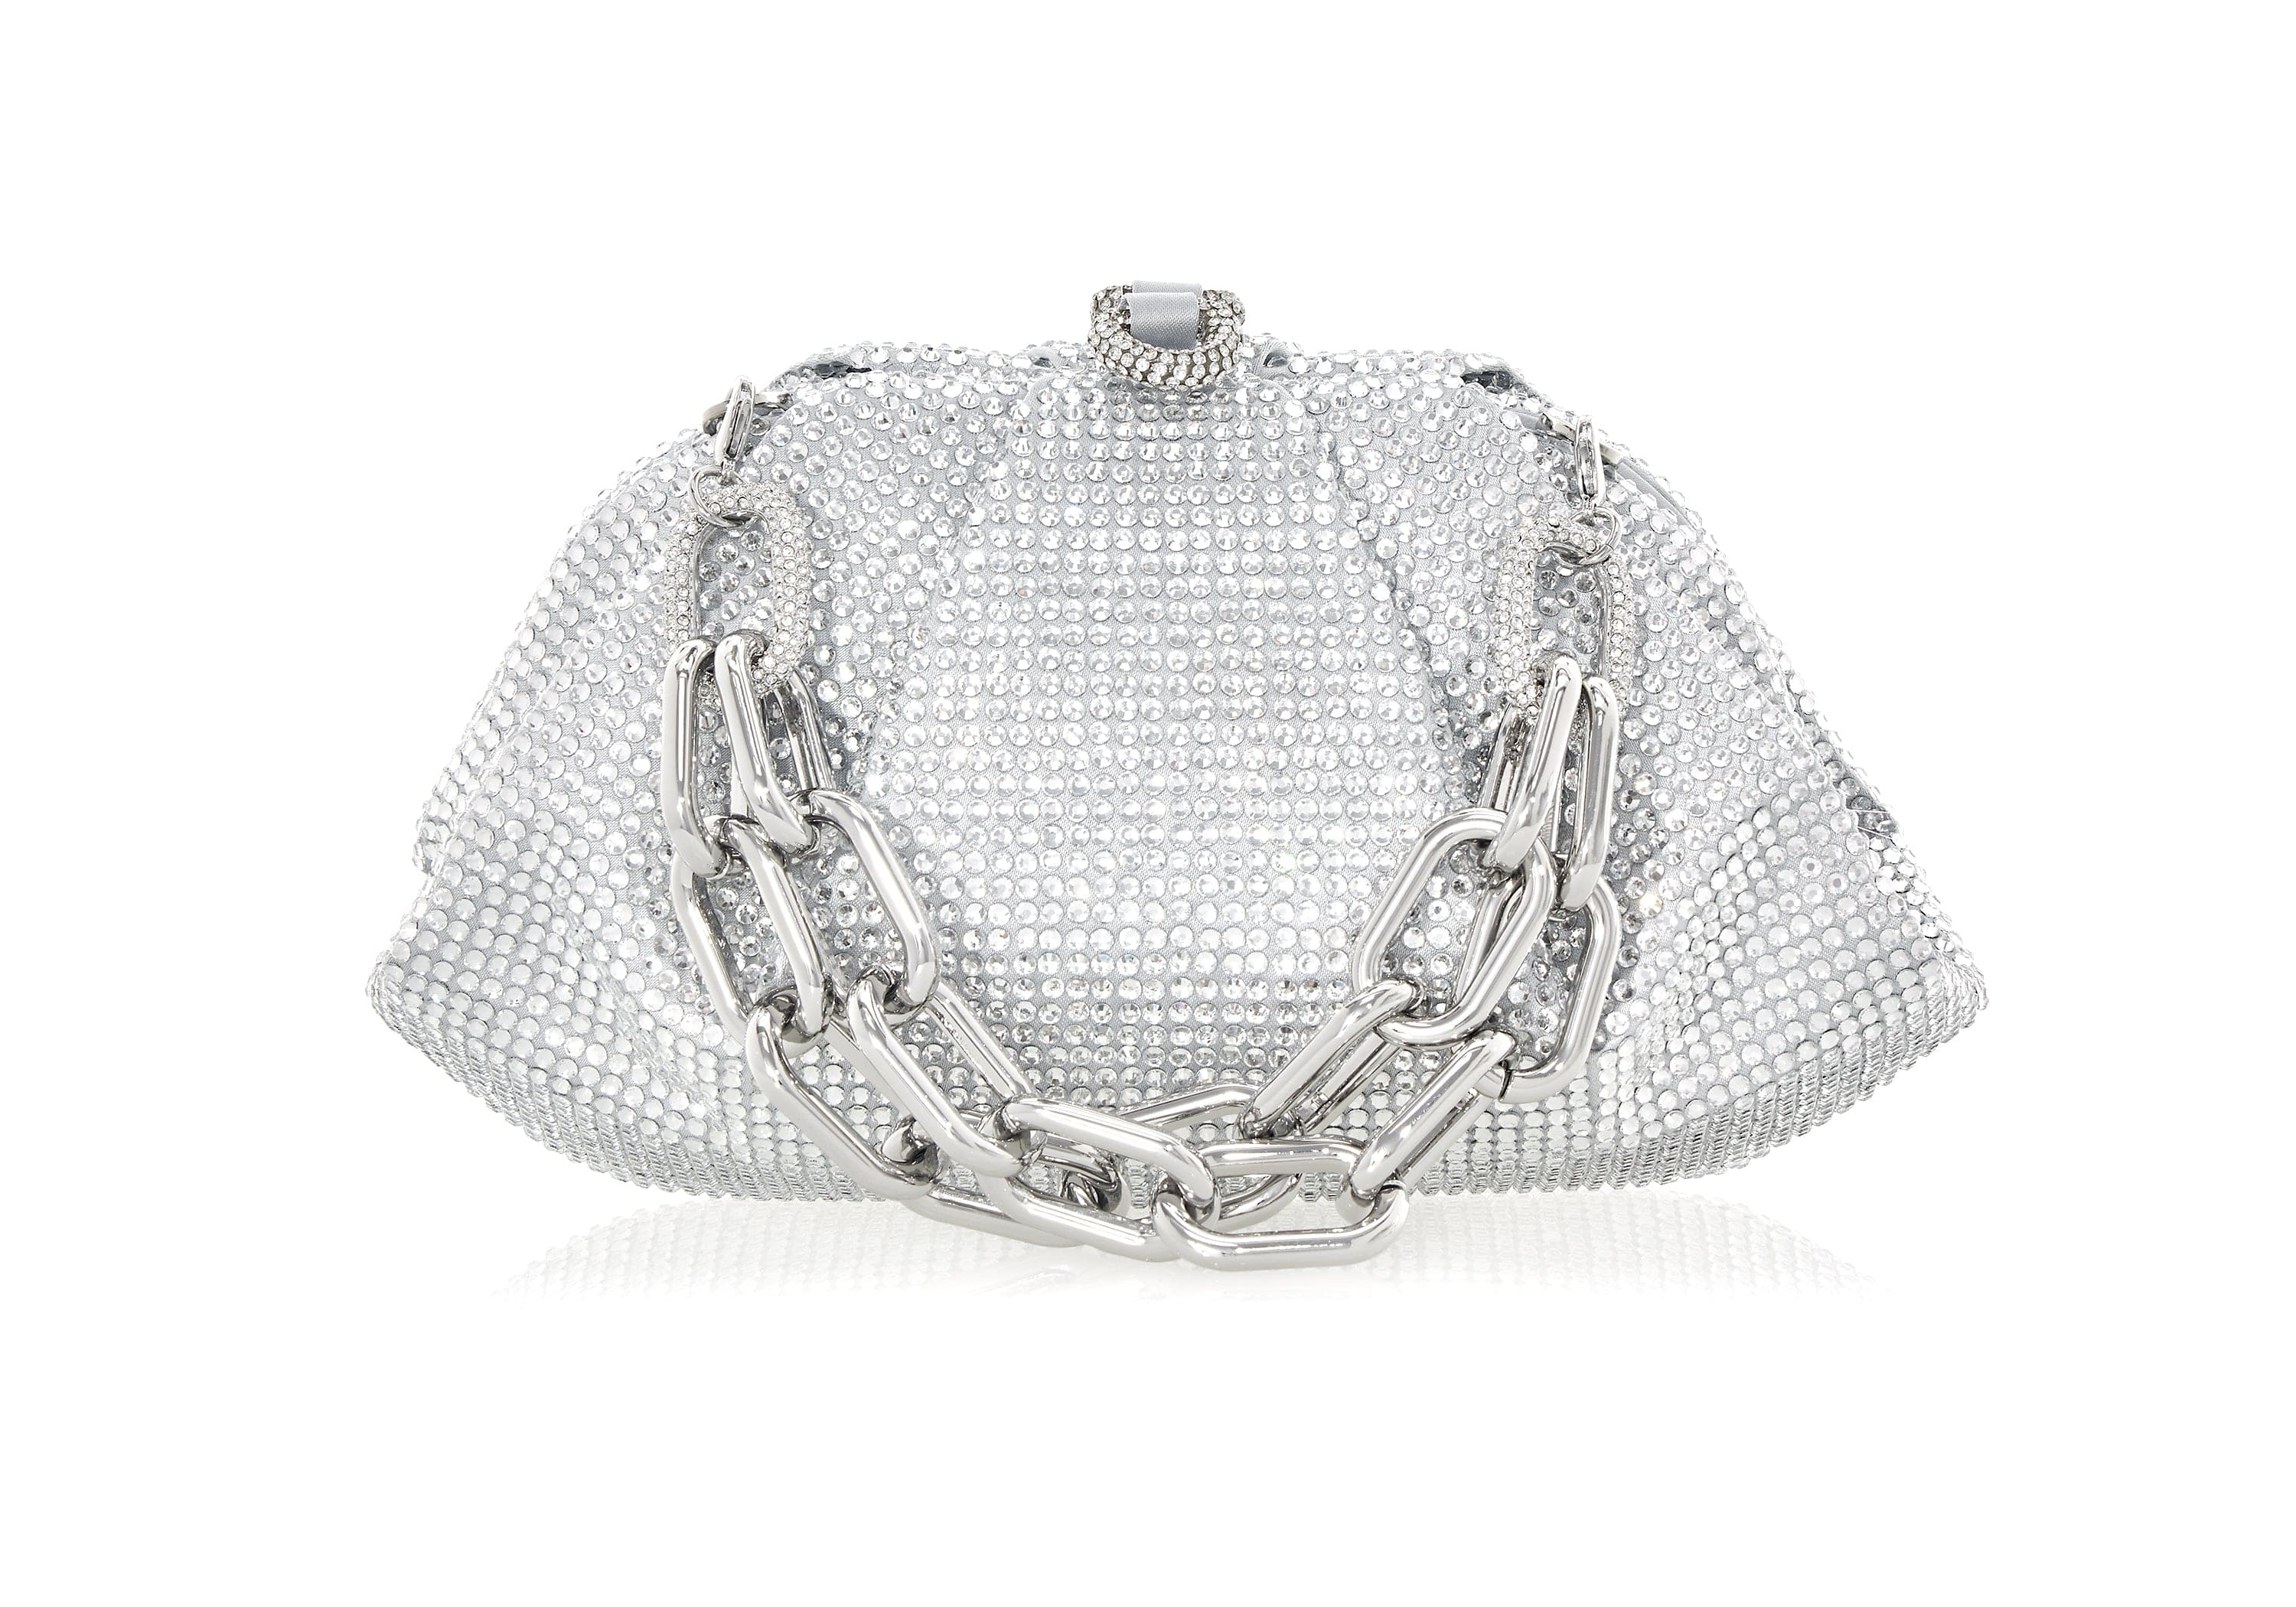 Glamorous Silver Clear Crystal Evening Bag